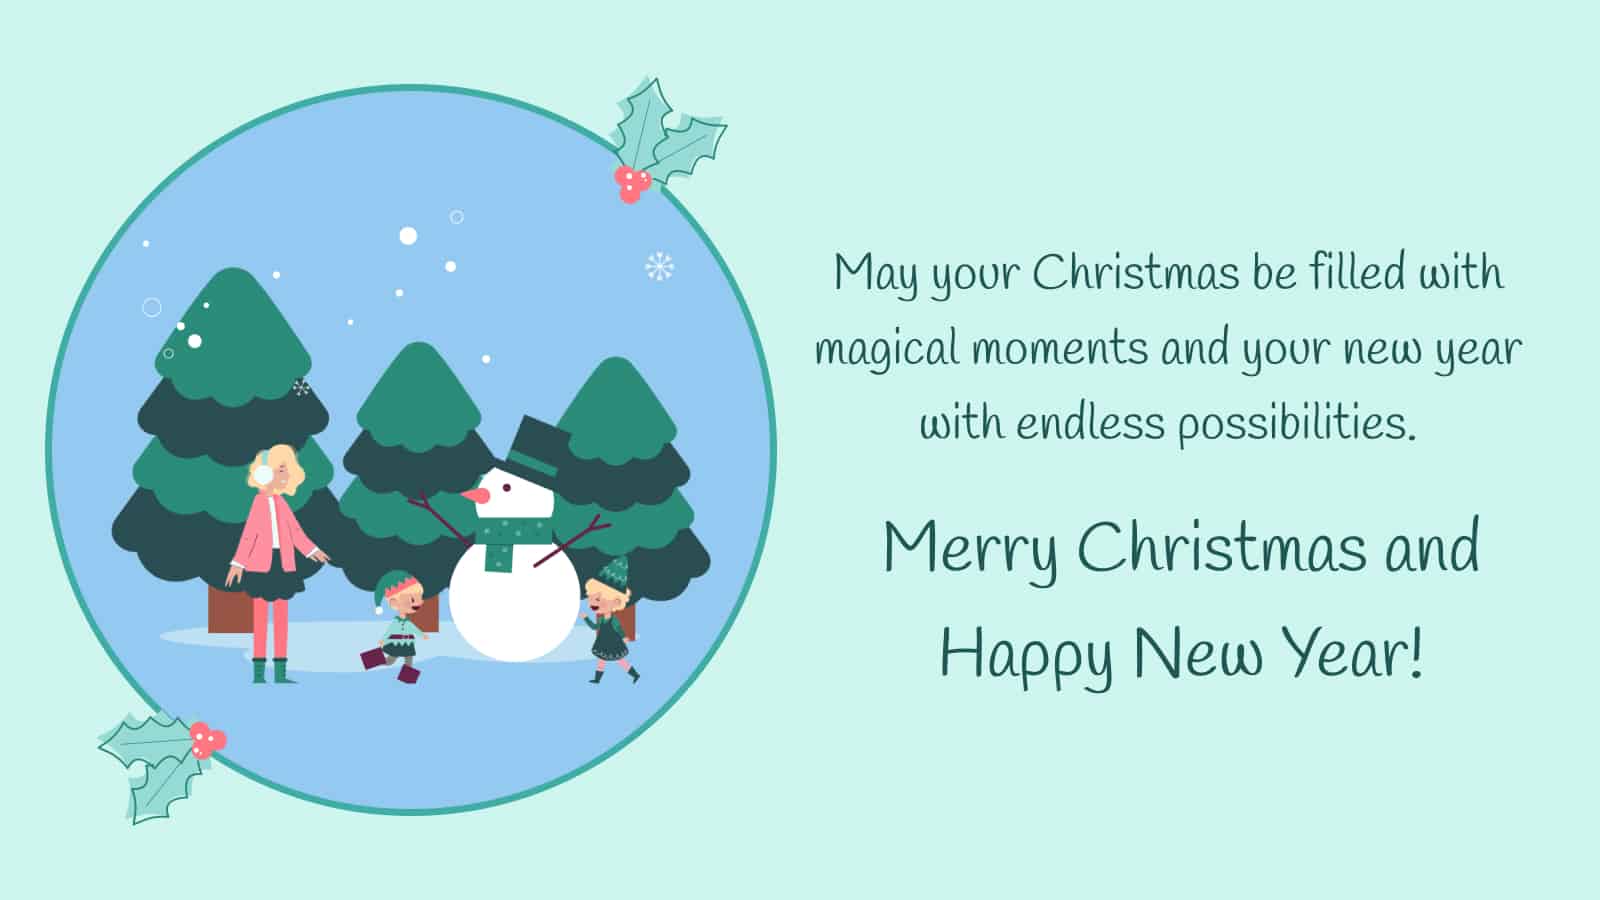 Image 2 with Merry Christmas and Happy New Year card